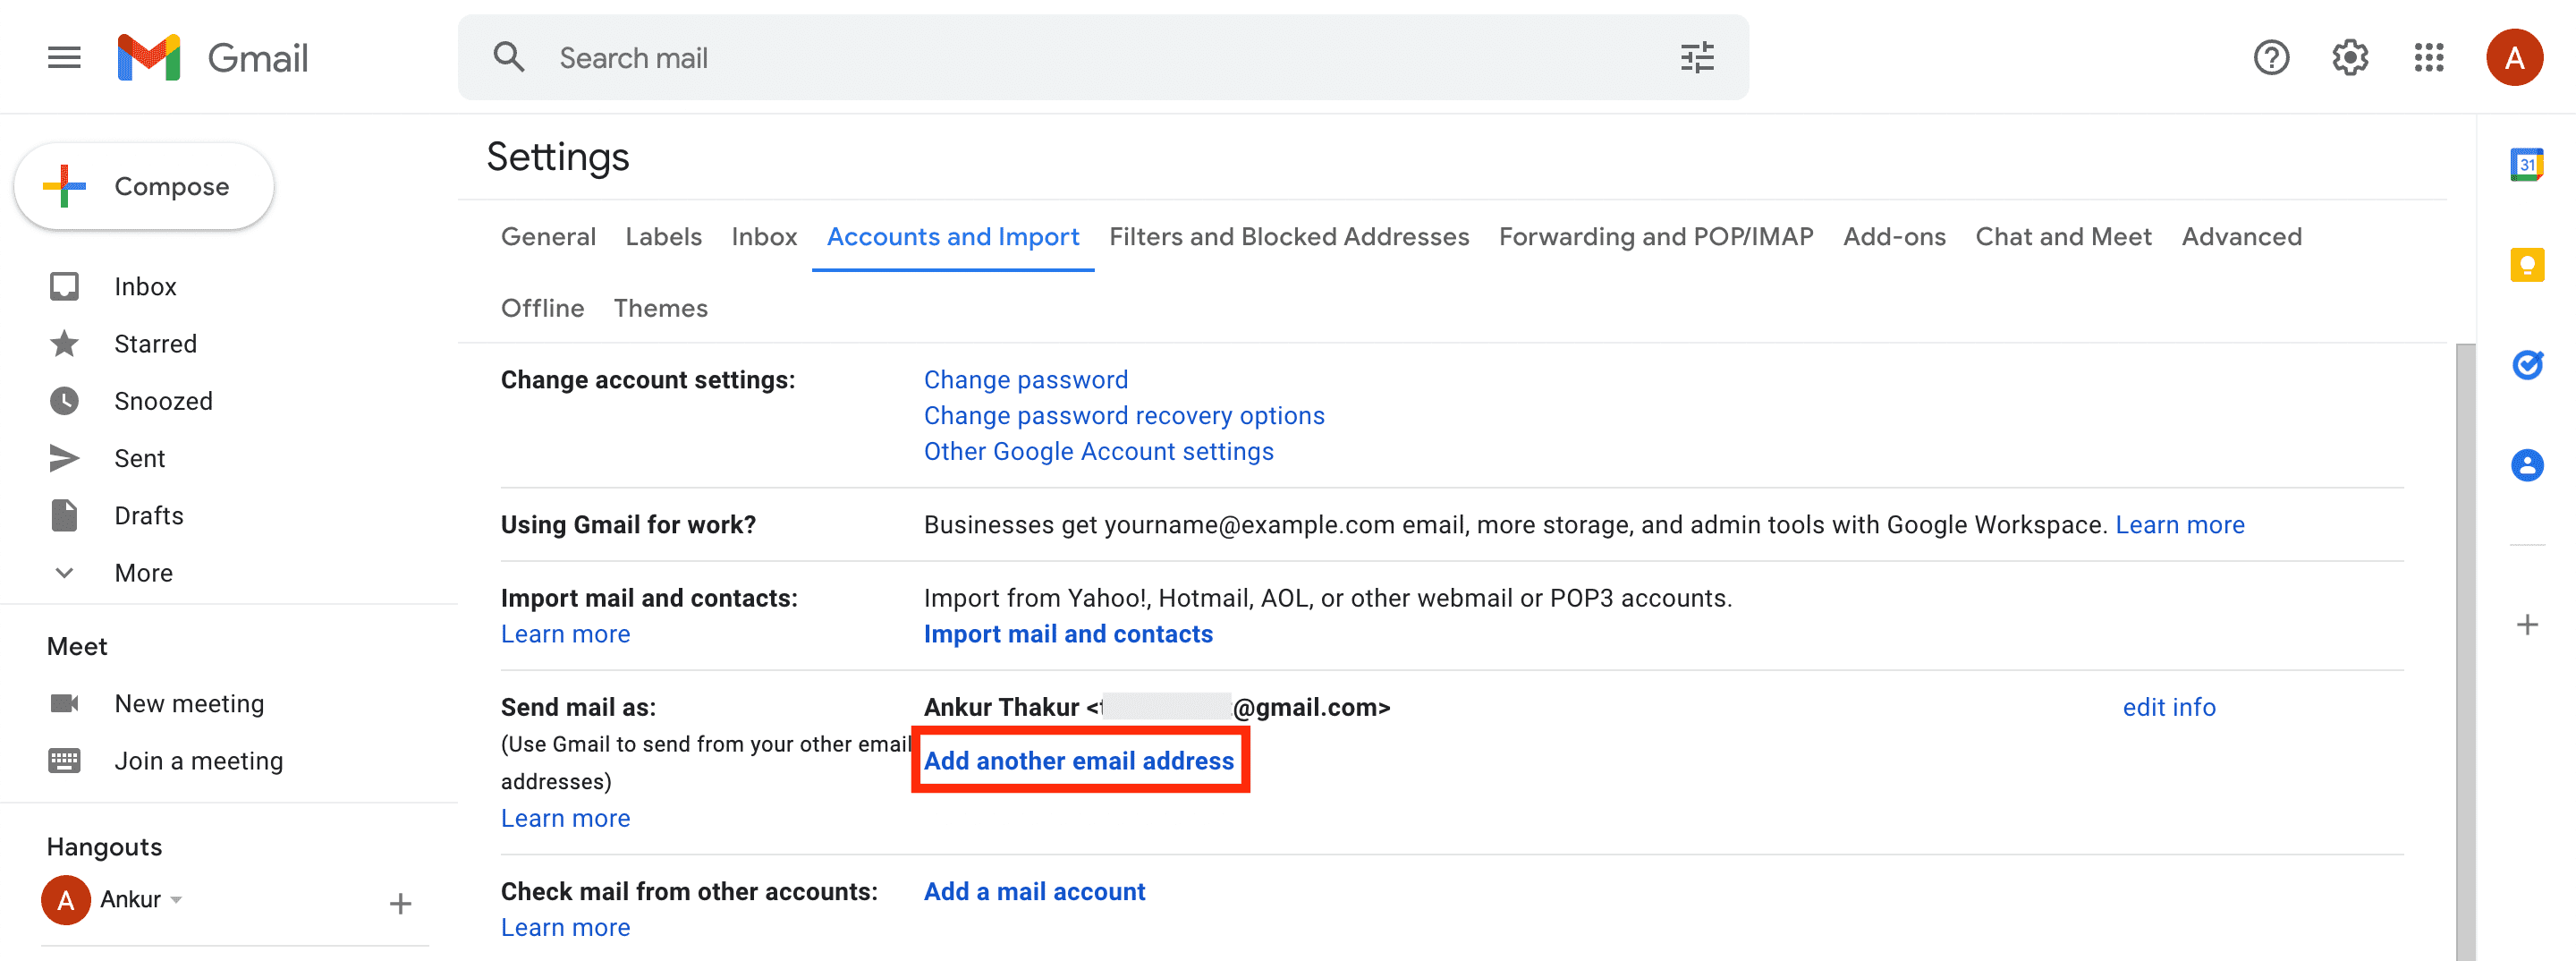 Add another email address in Gmail settings